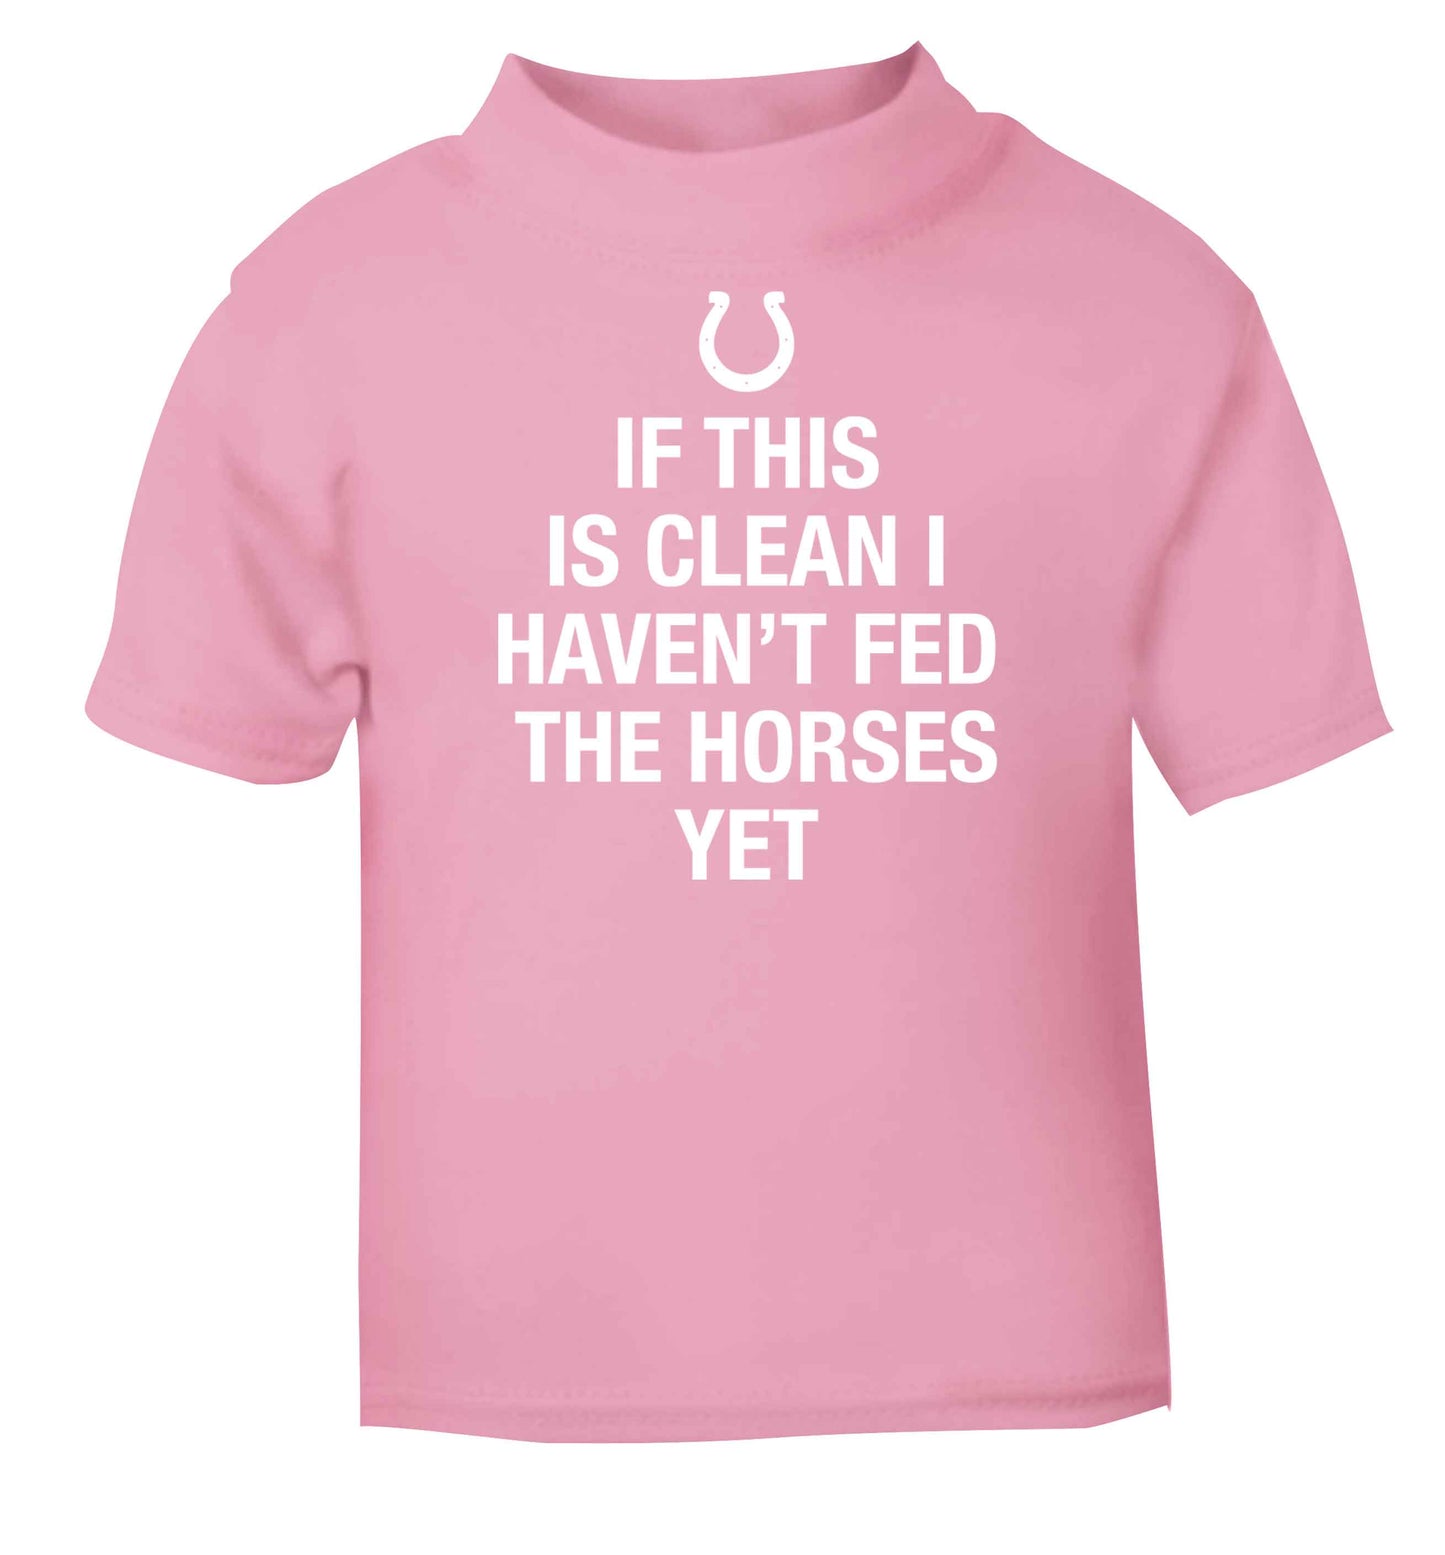 If this isn't clean I haven't fed the horses yet light pink baby toddler Tshirt 2 Years